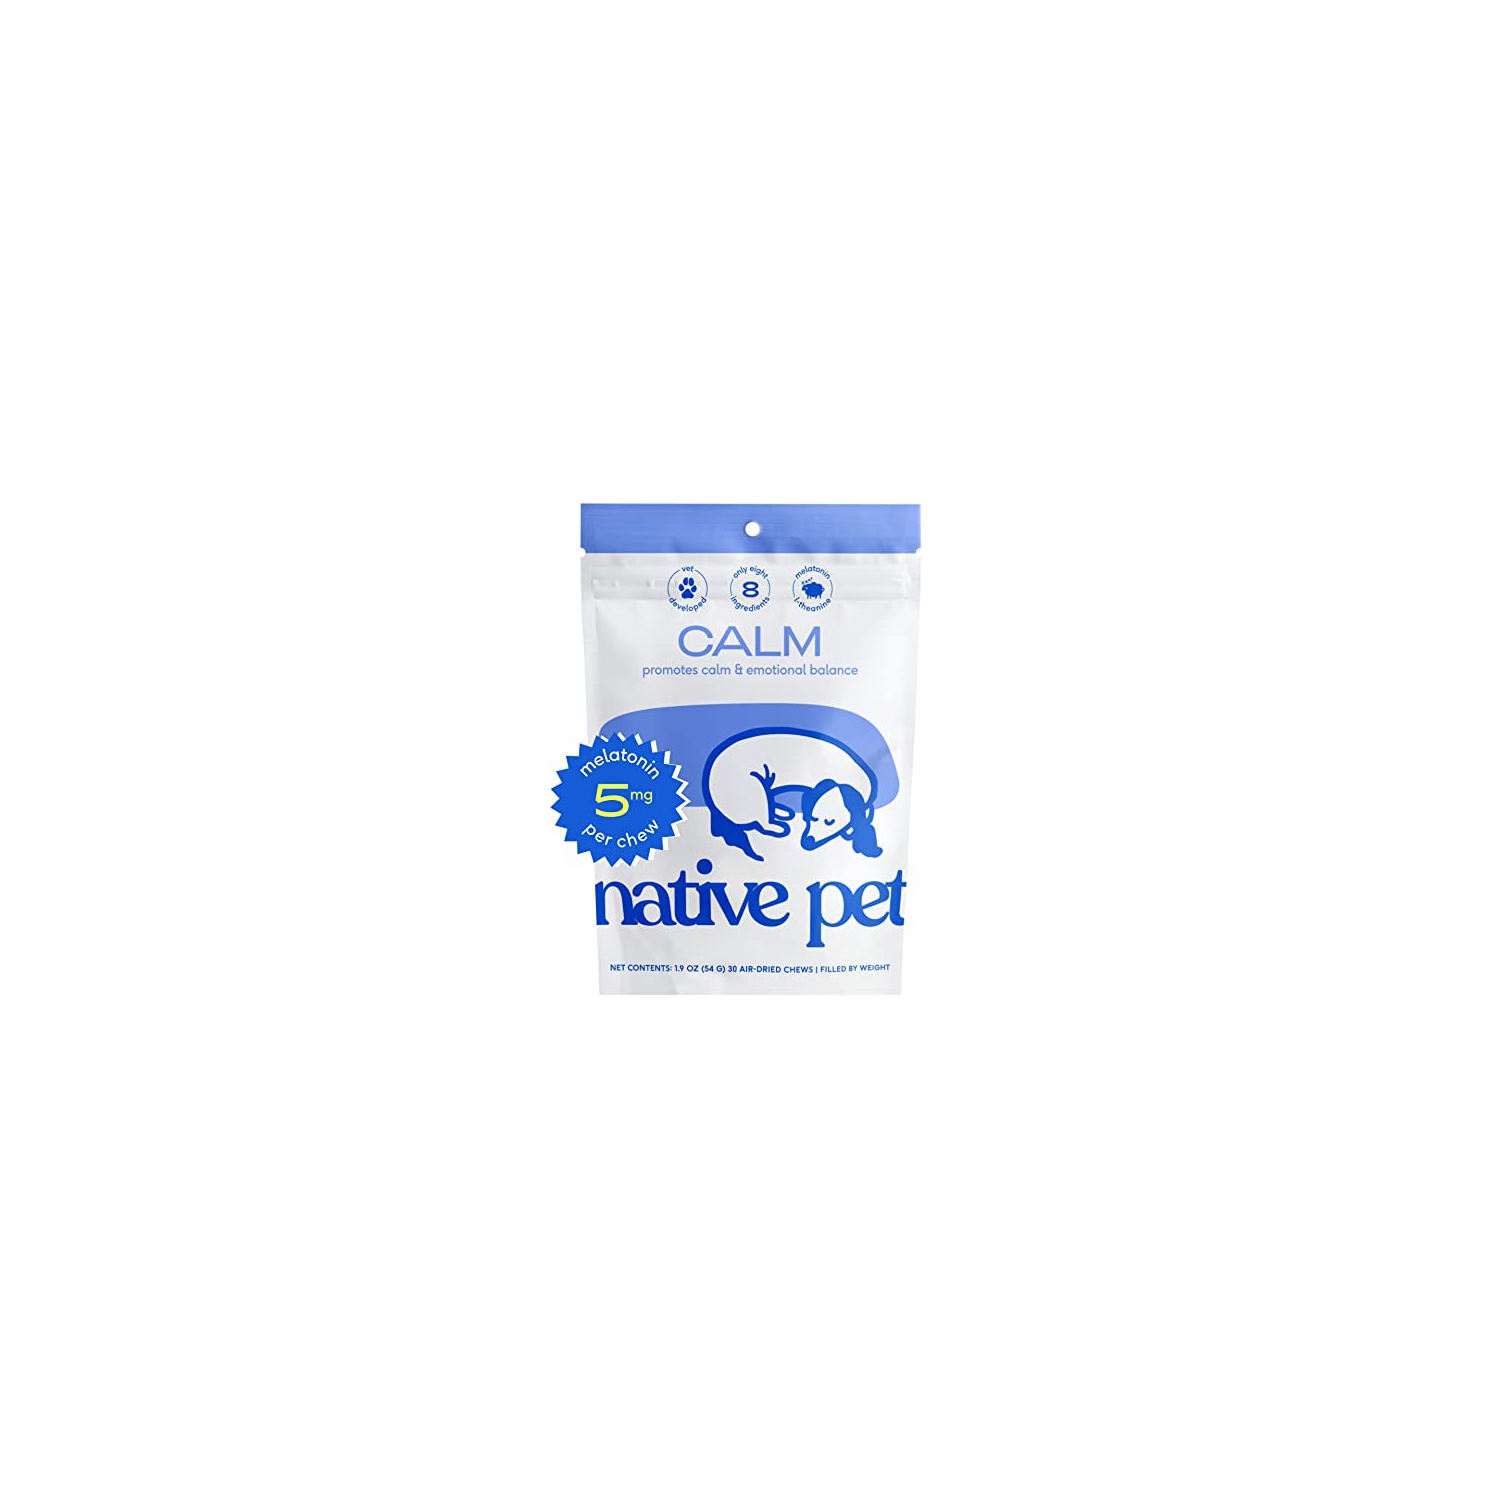 Natural Dog Calming Chews with Melatonin for Dogs - Real Chicken Flavor, Sleep Aid & Anxiety Relief - 30 Treats